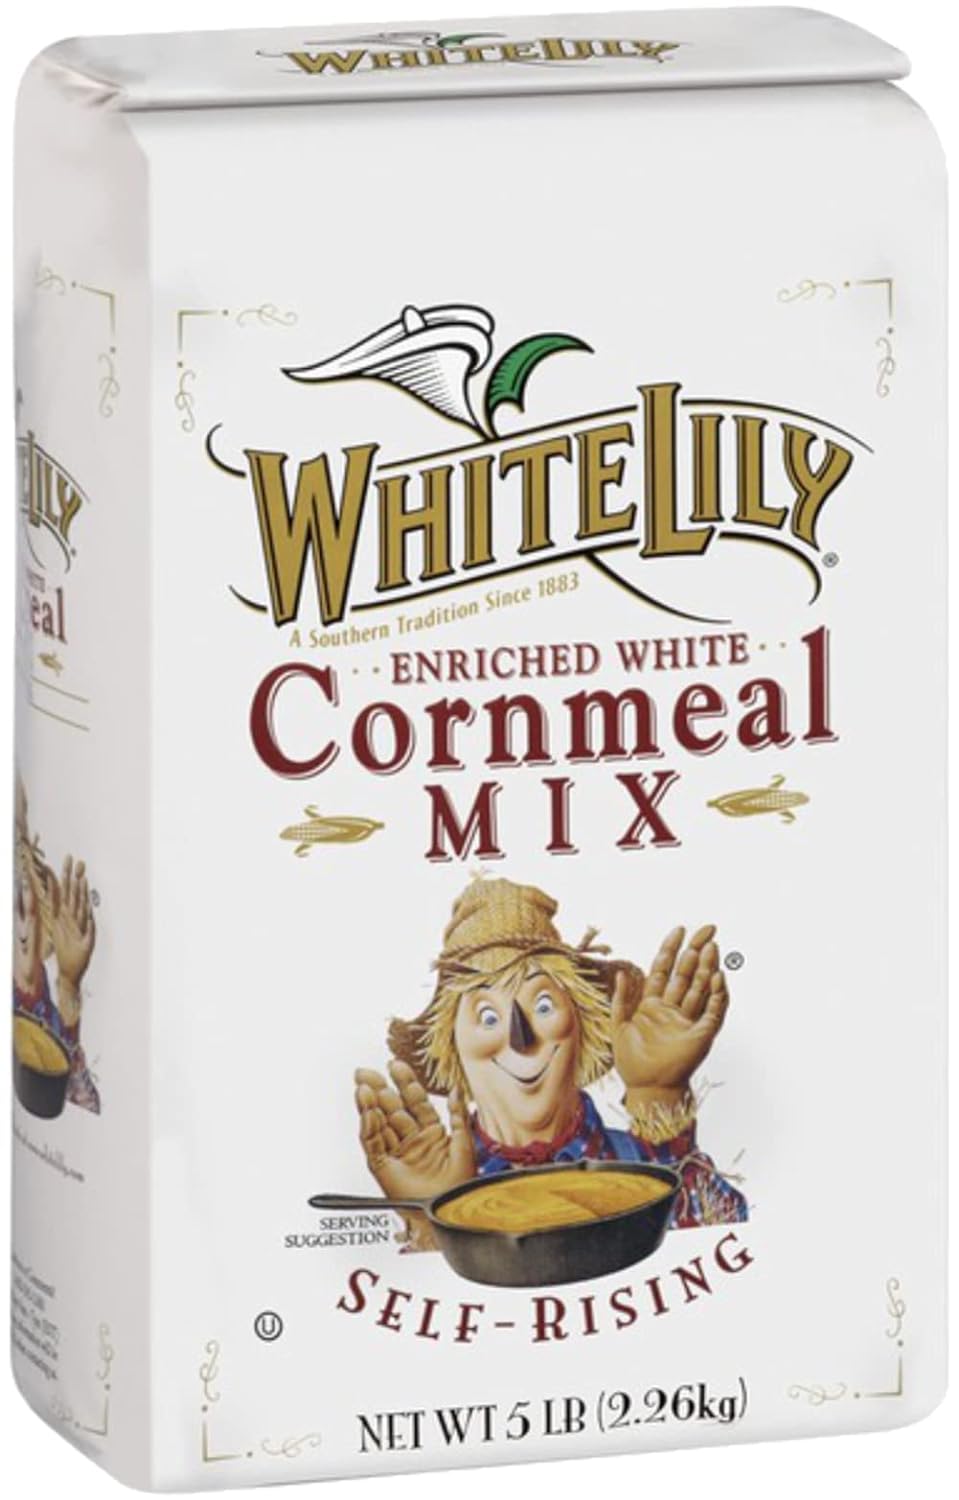 White Lily Enriched White Self-Rising Cornmeal Mix 5 lb Bag (Pack of 2) with By The Cup Swivel Spoons : Grocery & Gourmet Food